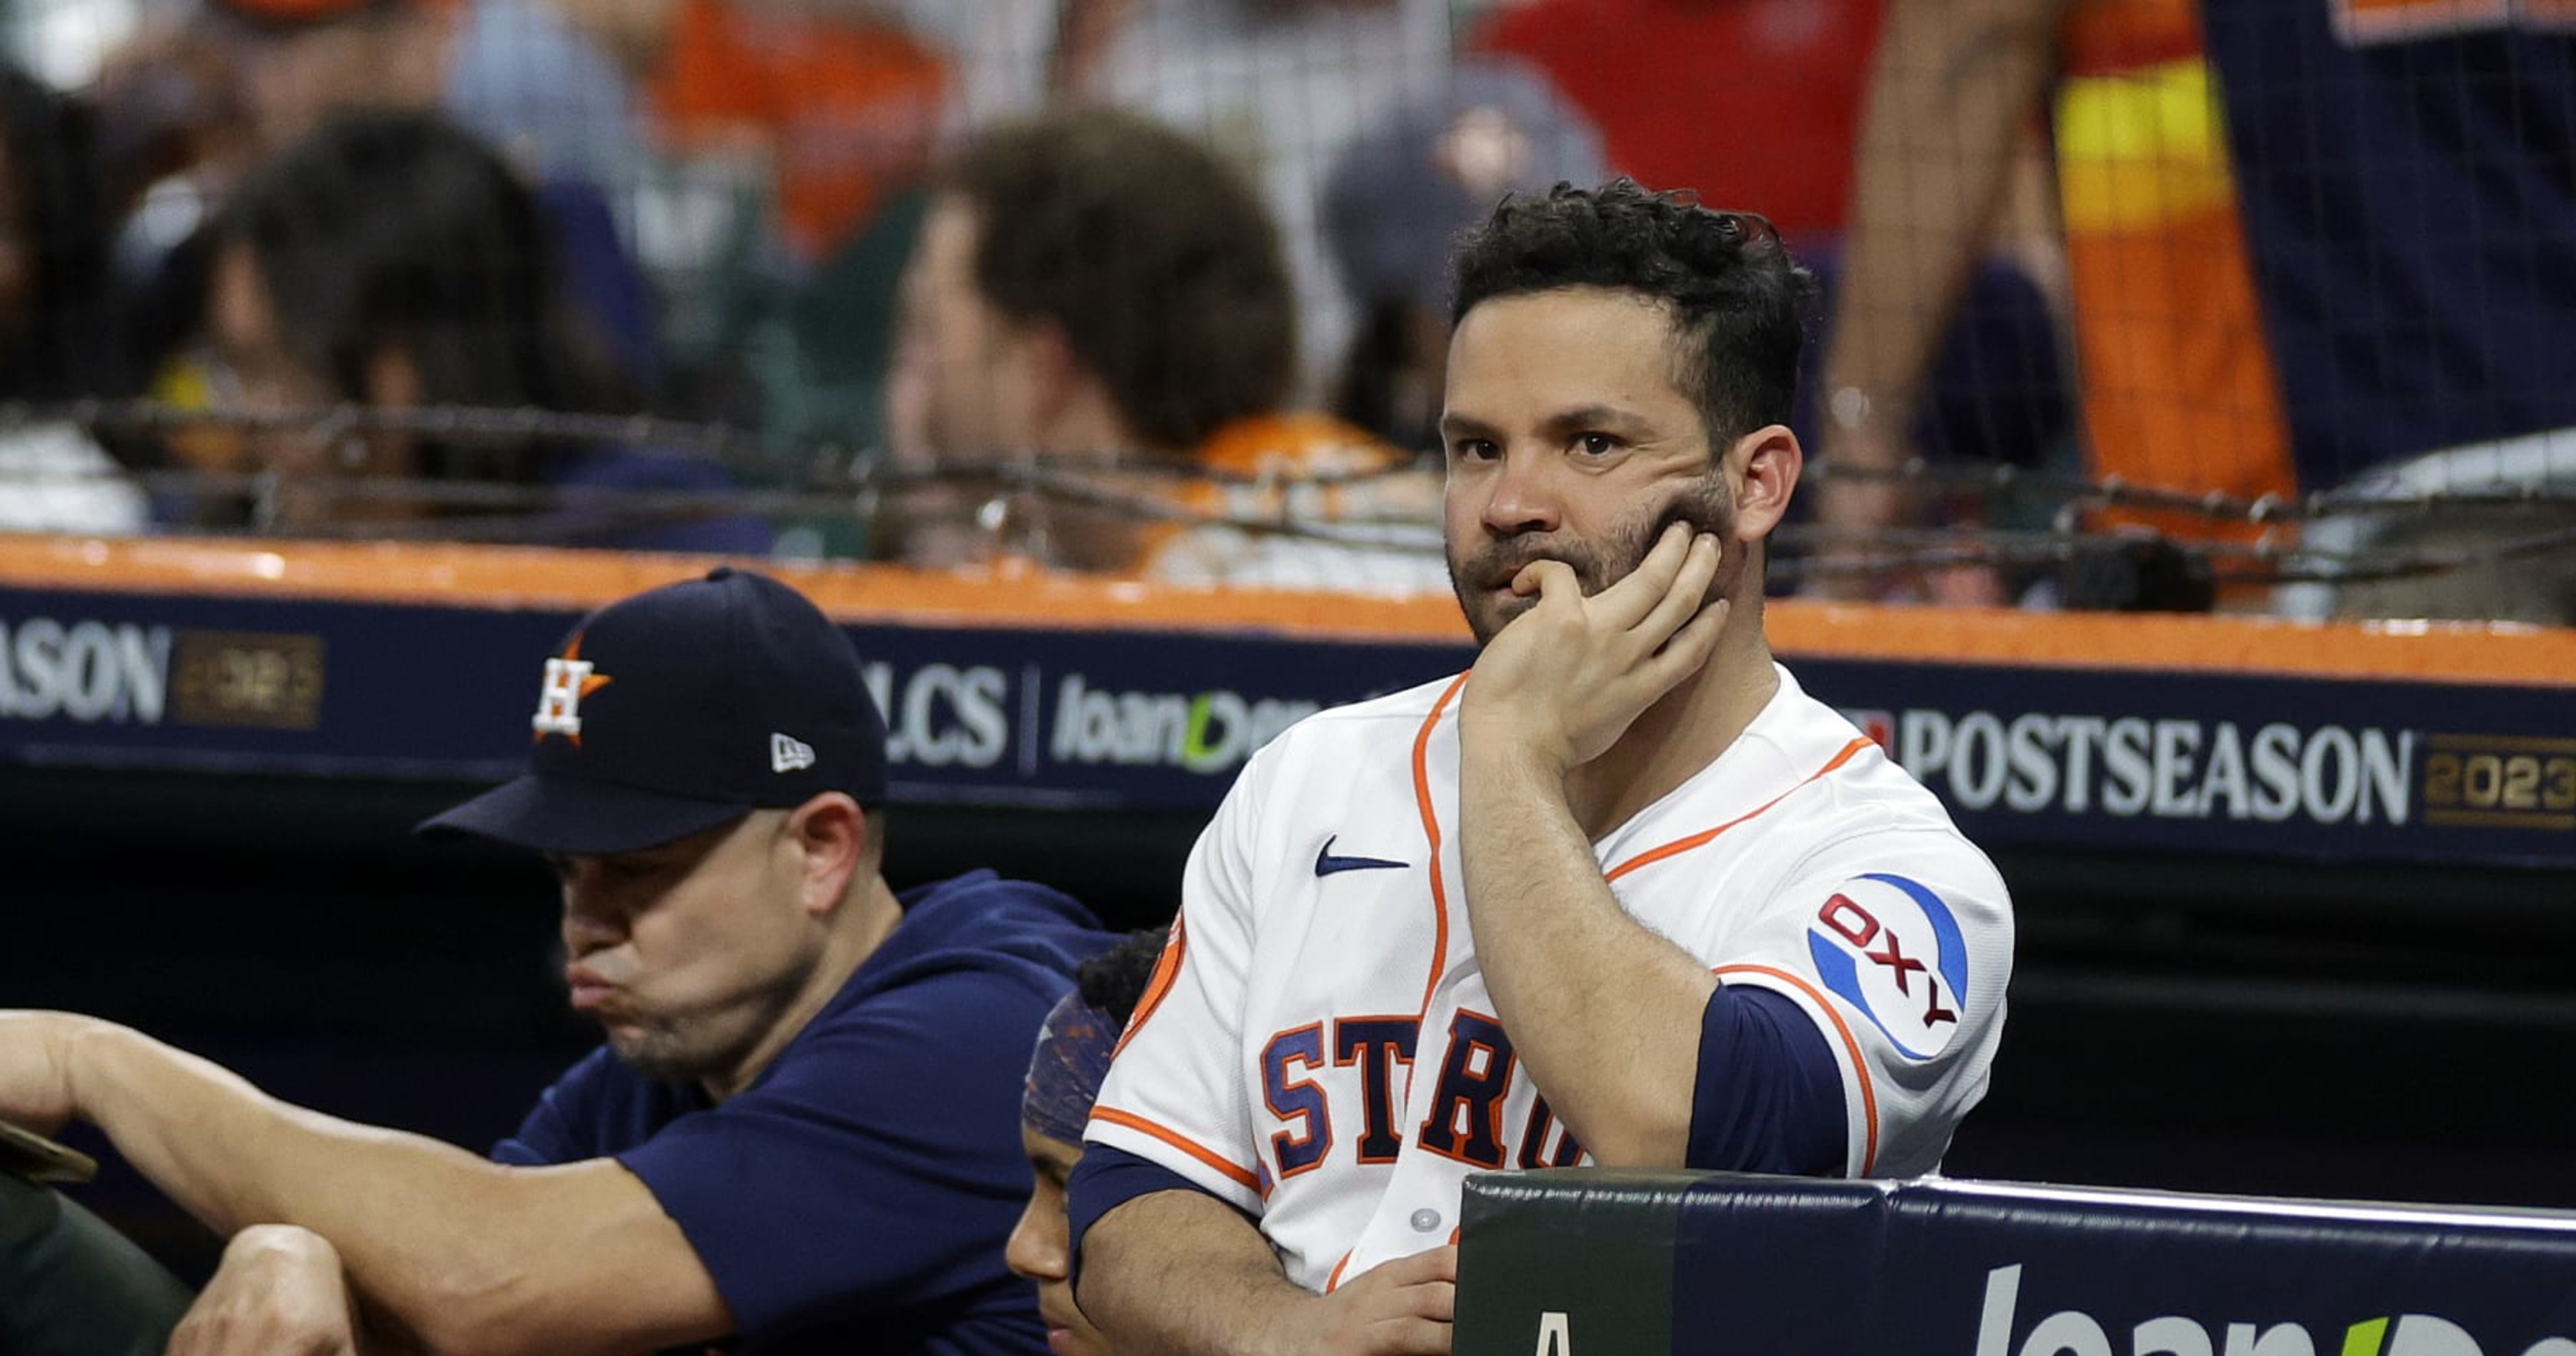 Baseball could use a feel-good story, but the Astros aren't it